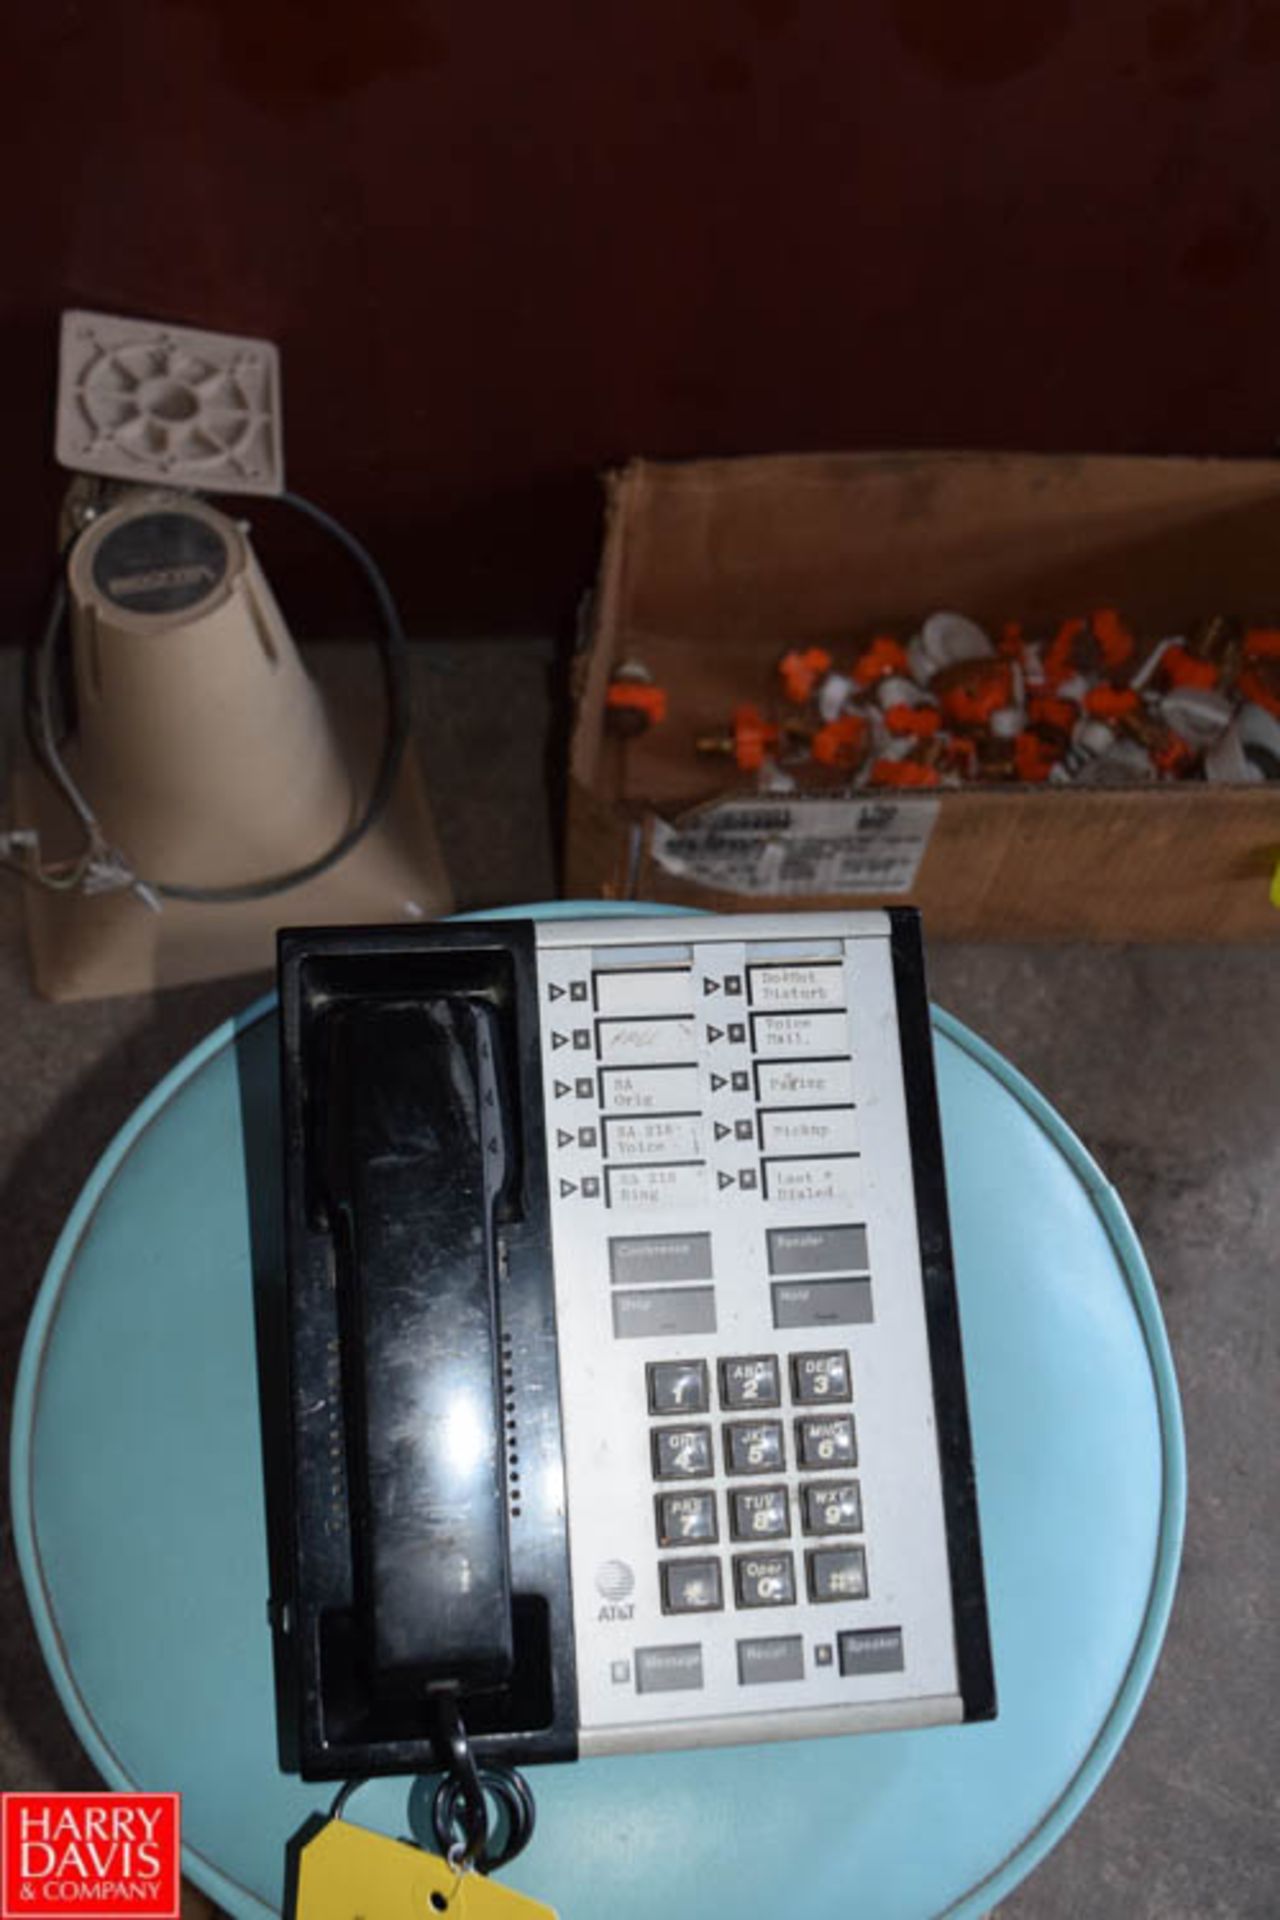 AT&T Telephones Rigging Fee: $100